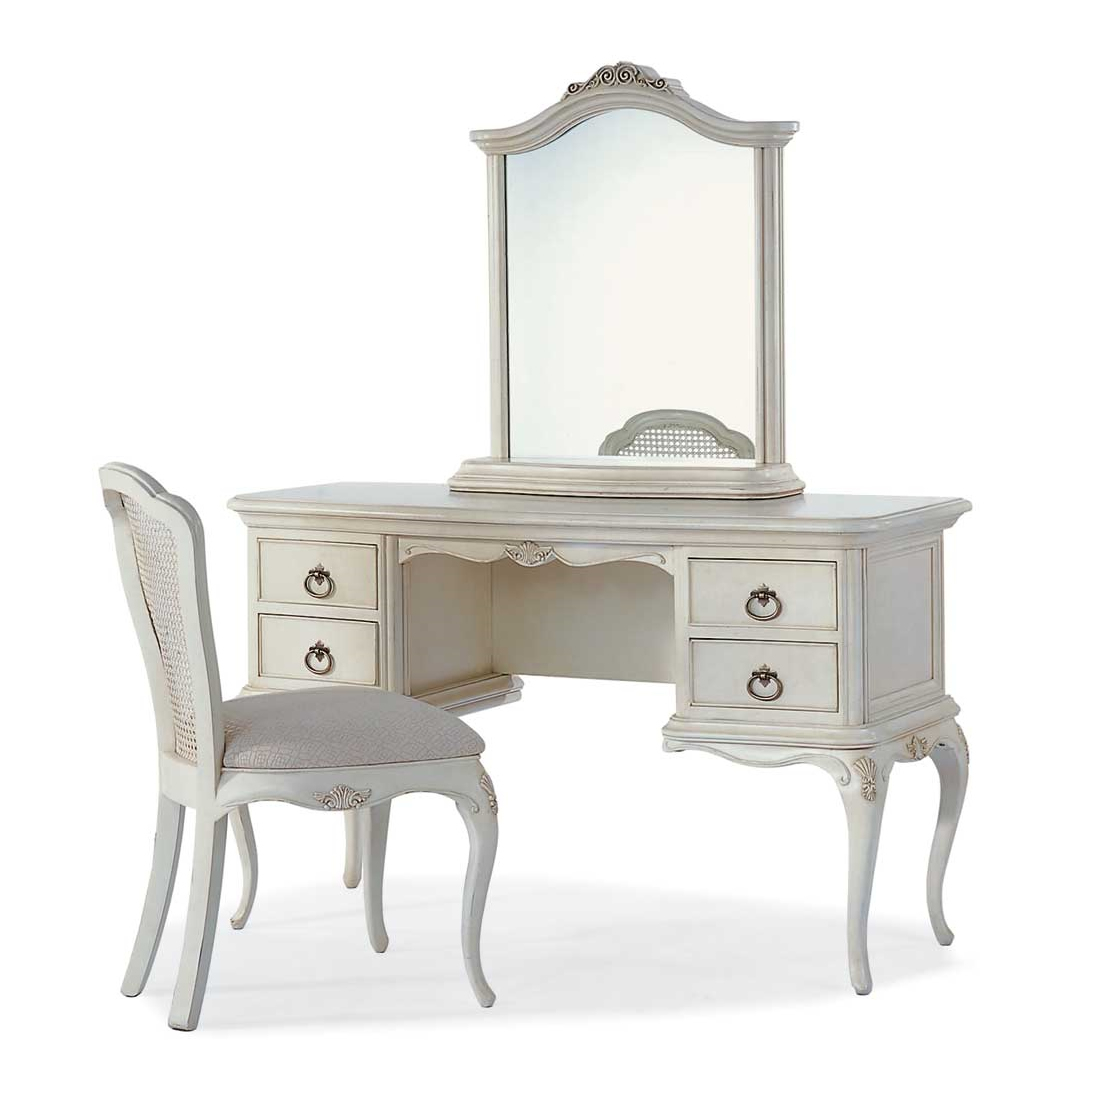 Ivory dressing table a